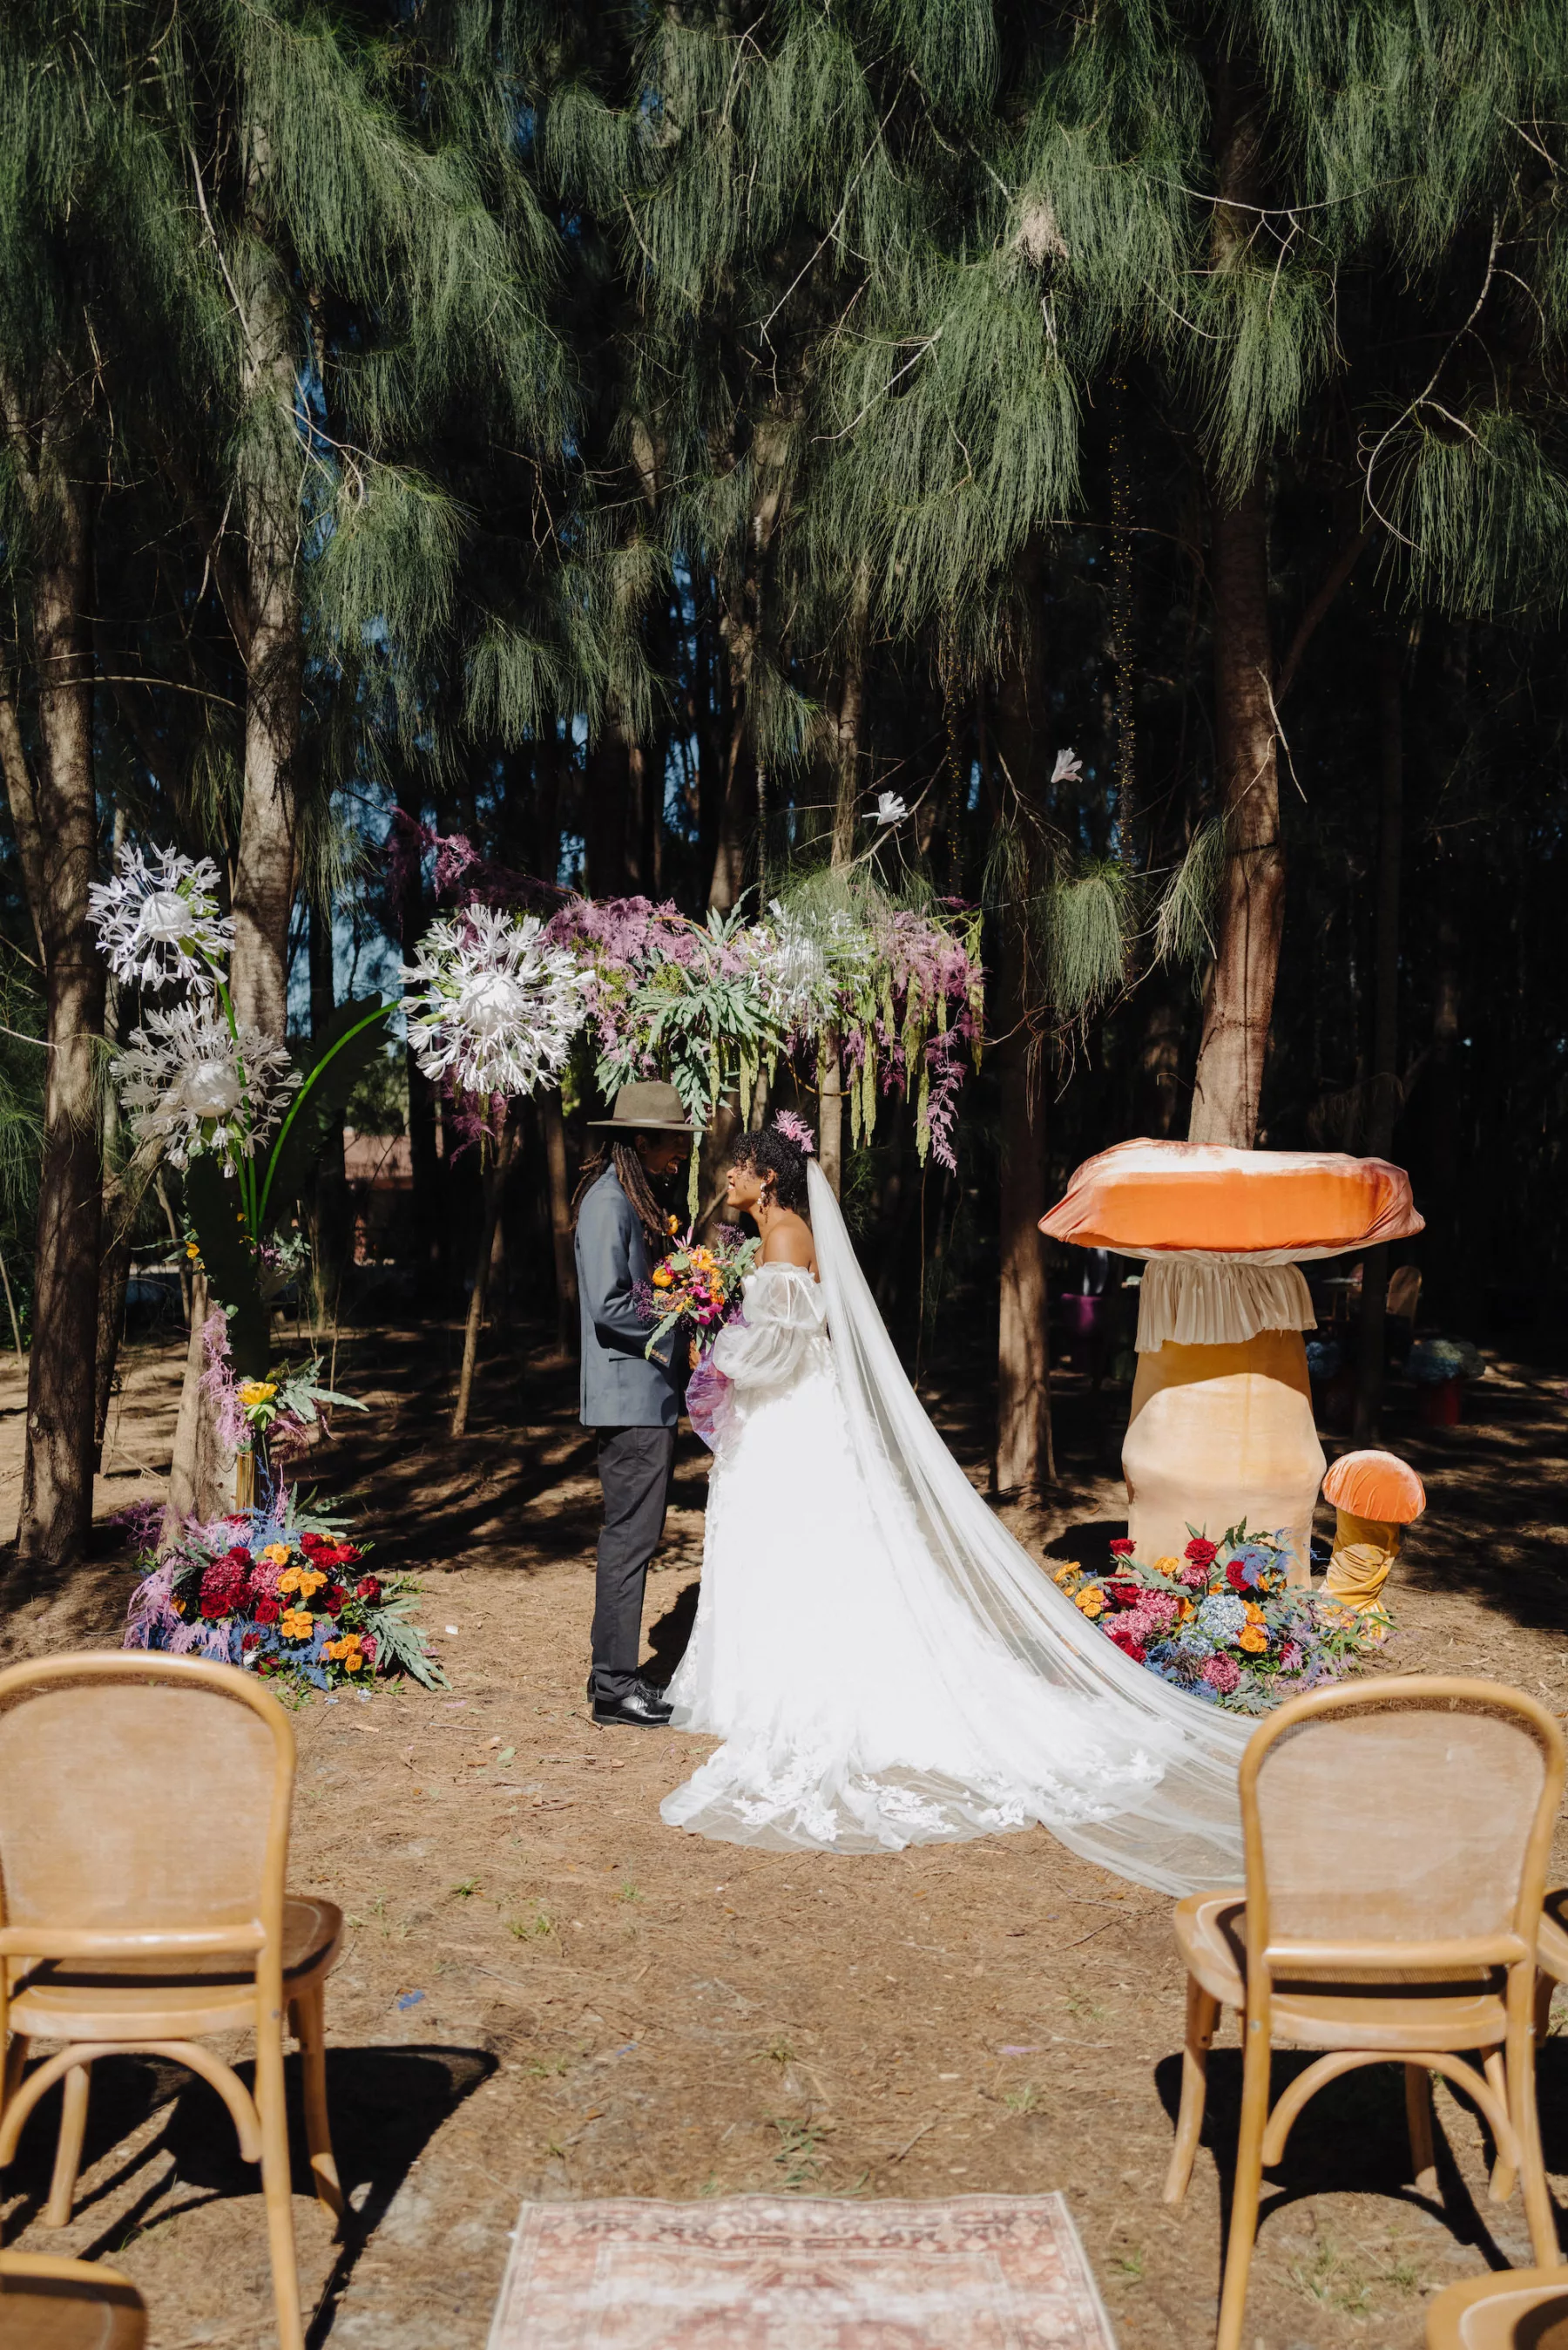 Bride and Groom Private Vow Reading Wedding Portrait | White Strapless Tulle Wedding Dress with Removable Sleeves Inspiration | Tampa Private Estate Wedding Venue Royal Pine Estate | Planner Wilder Mind Events | Photographer McNeile Photography | Content Creators Behind The Vows